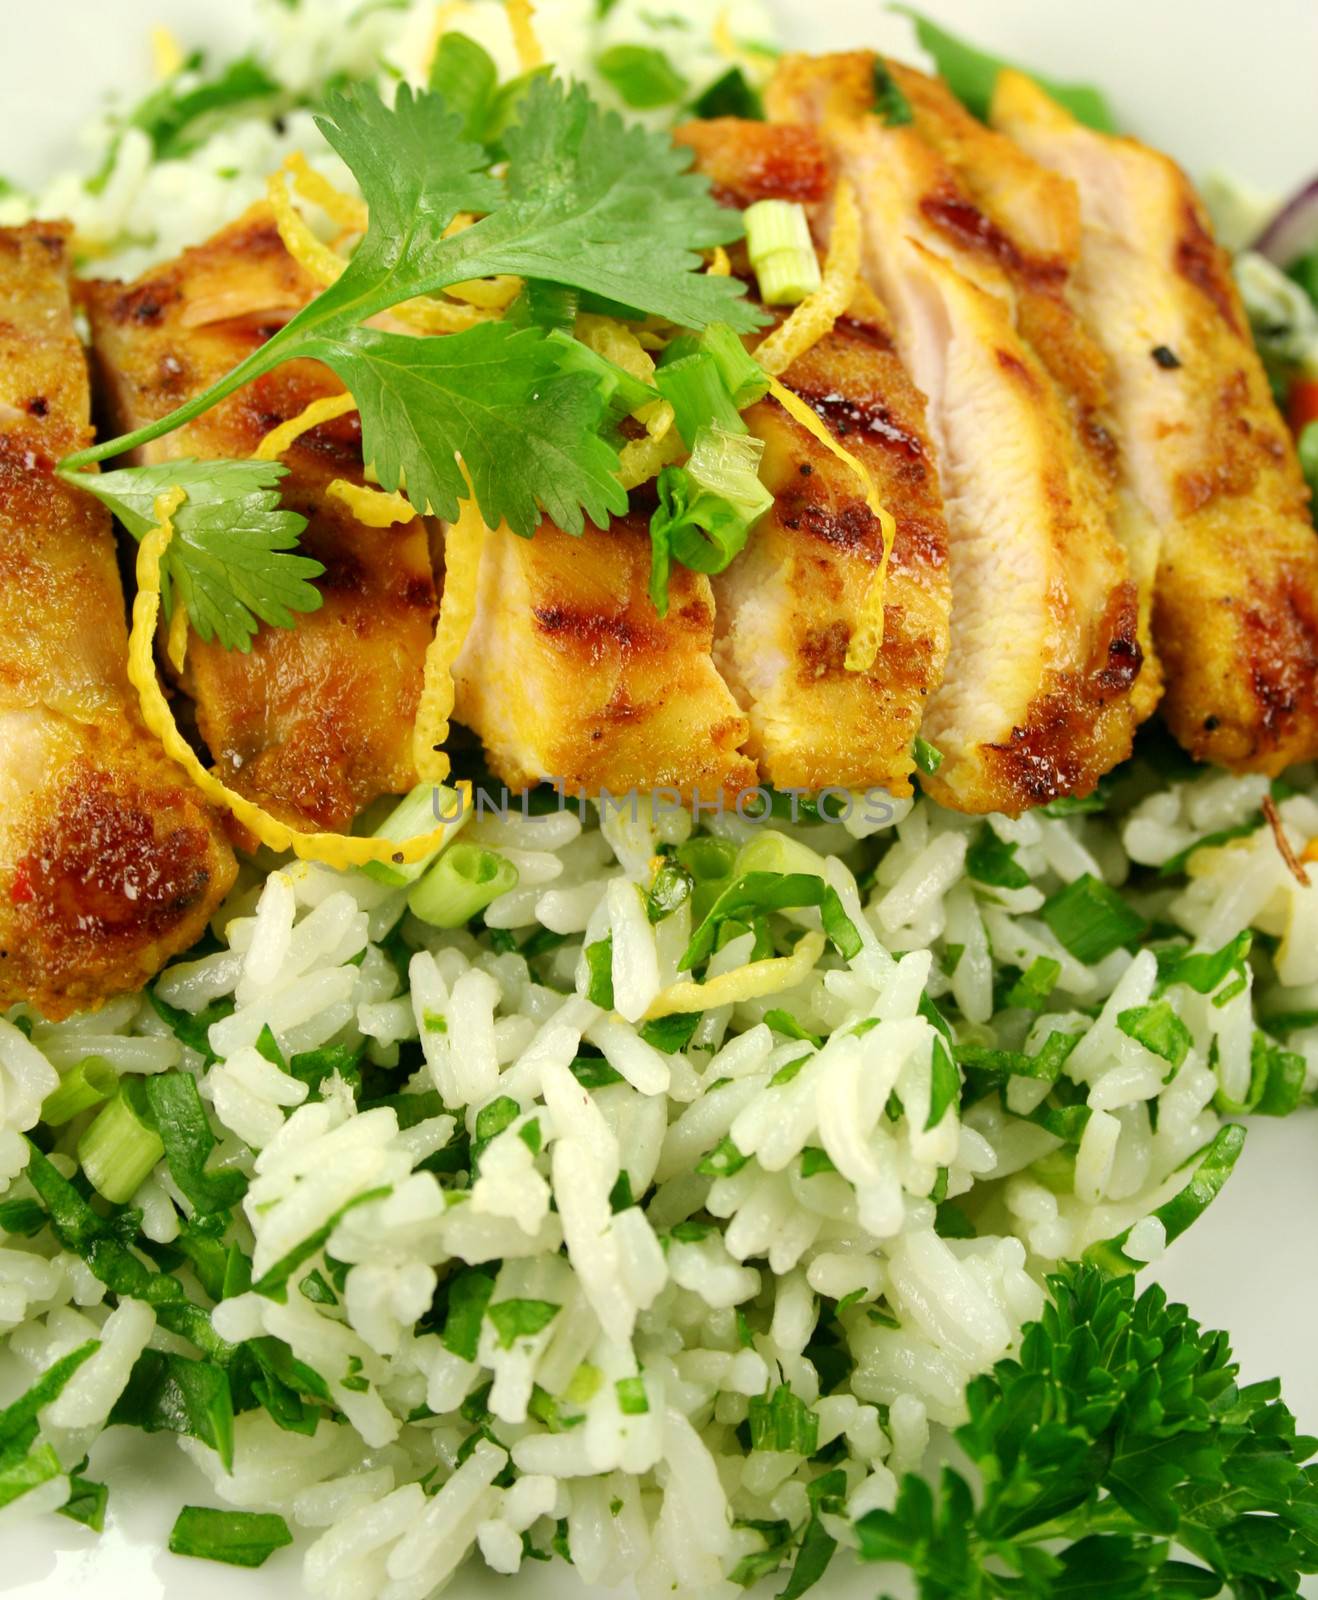 Delicious chicken tikka on a bed of lemon coriander rice with salad.